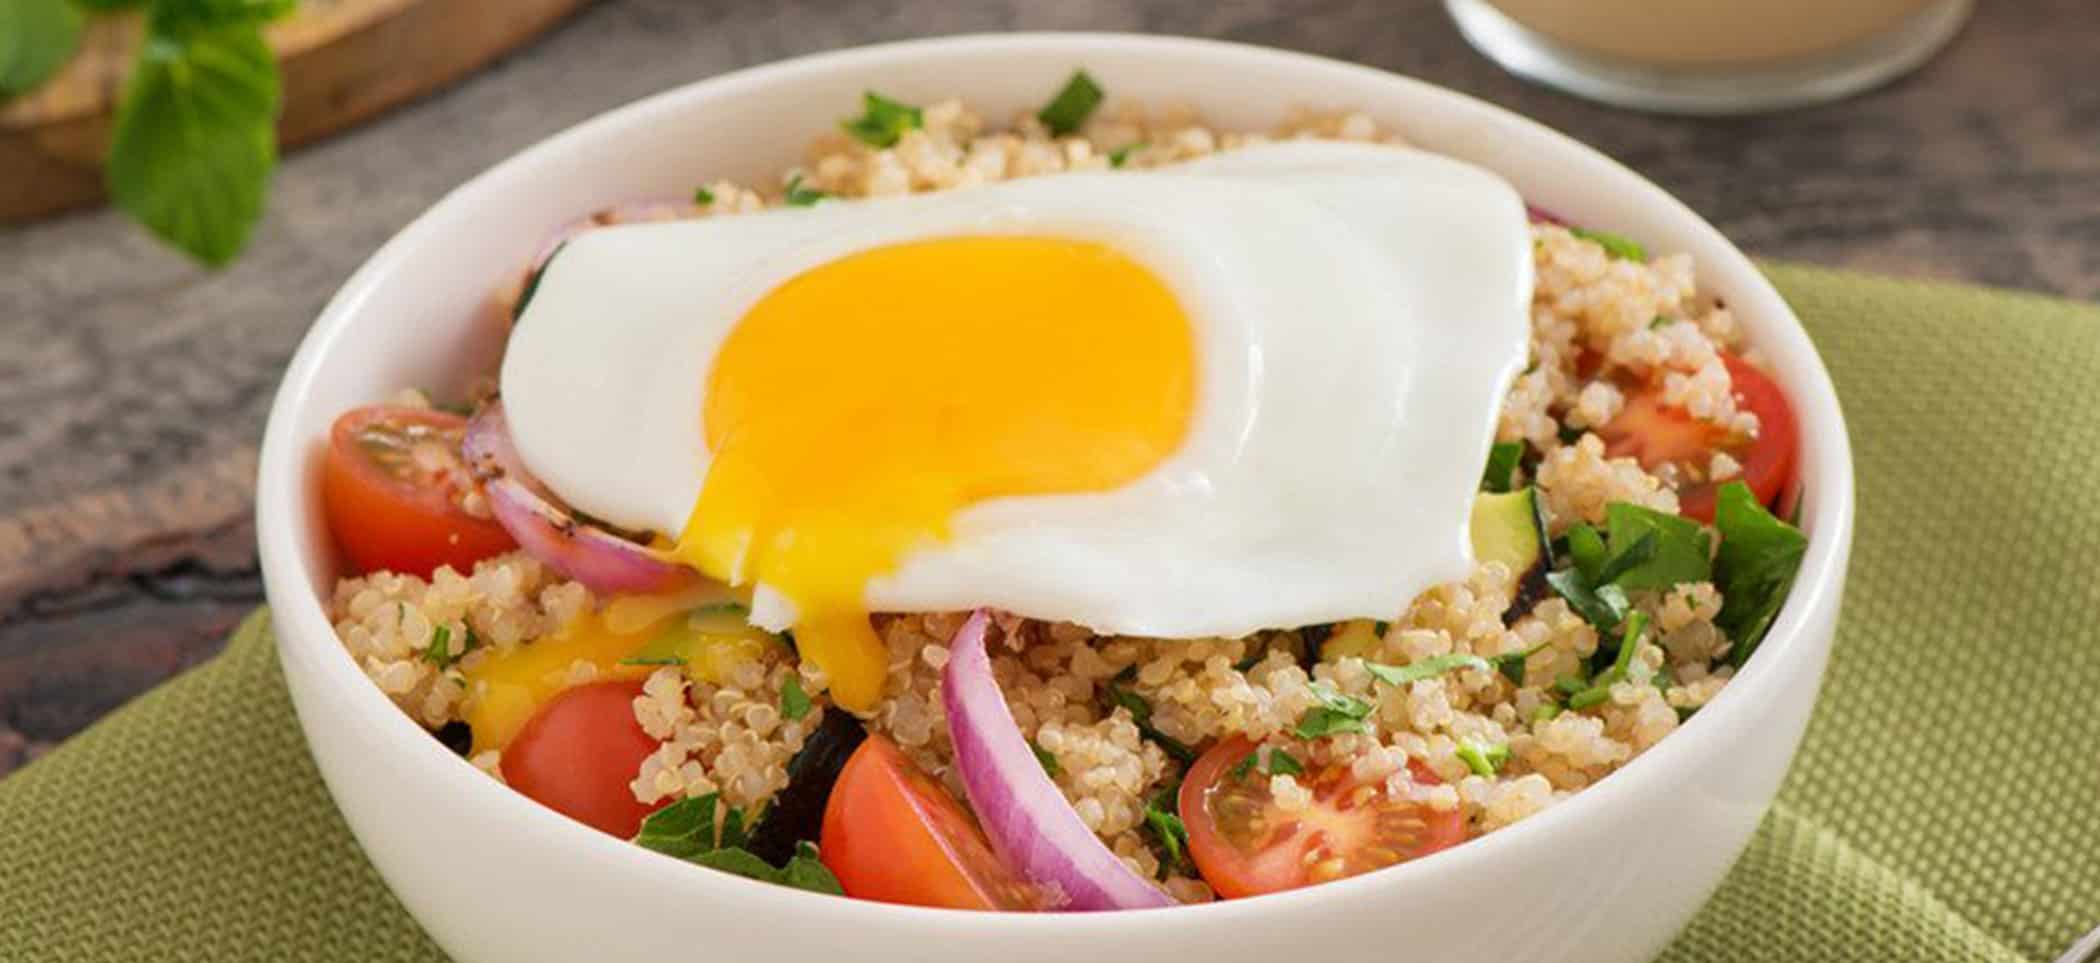 Summer Grilled Vegetable & Quinoa Salad with Eggs